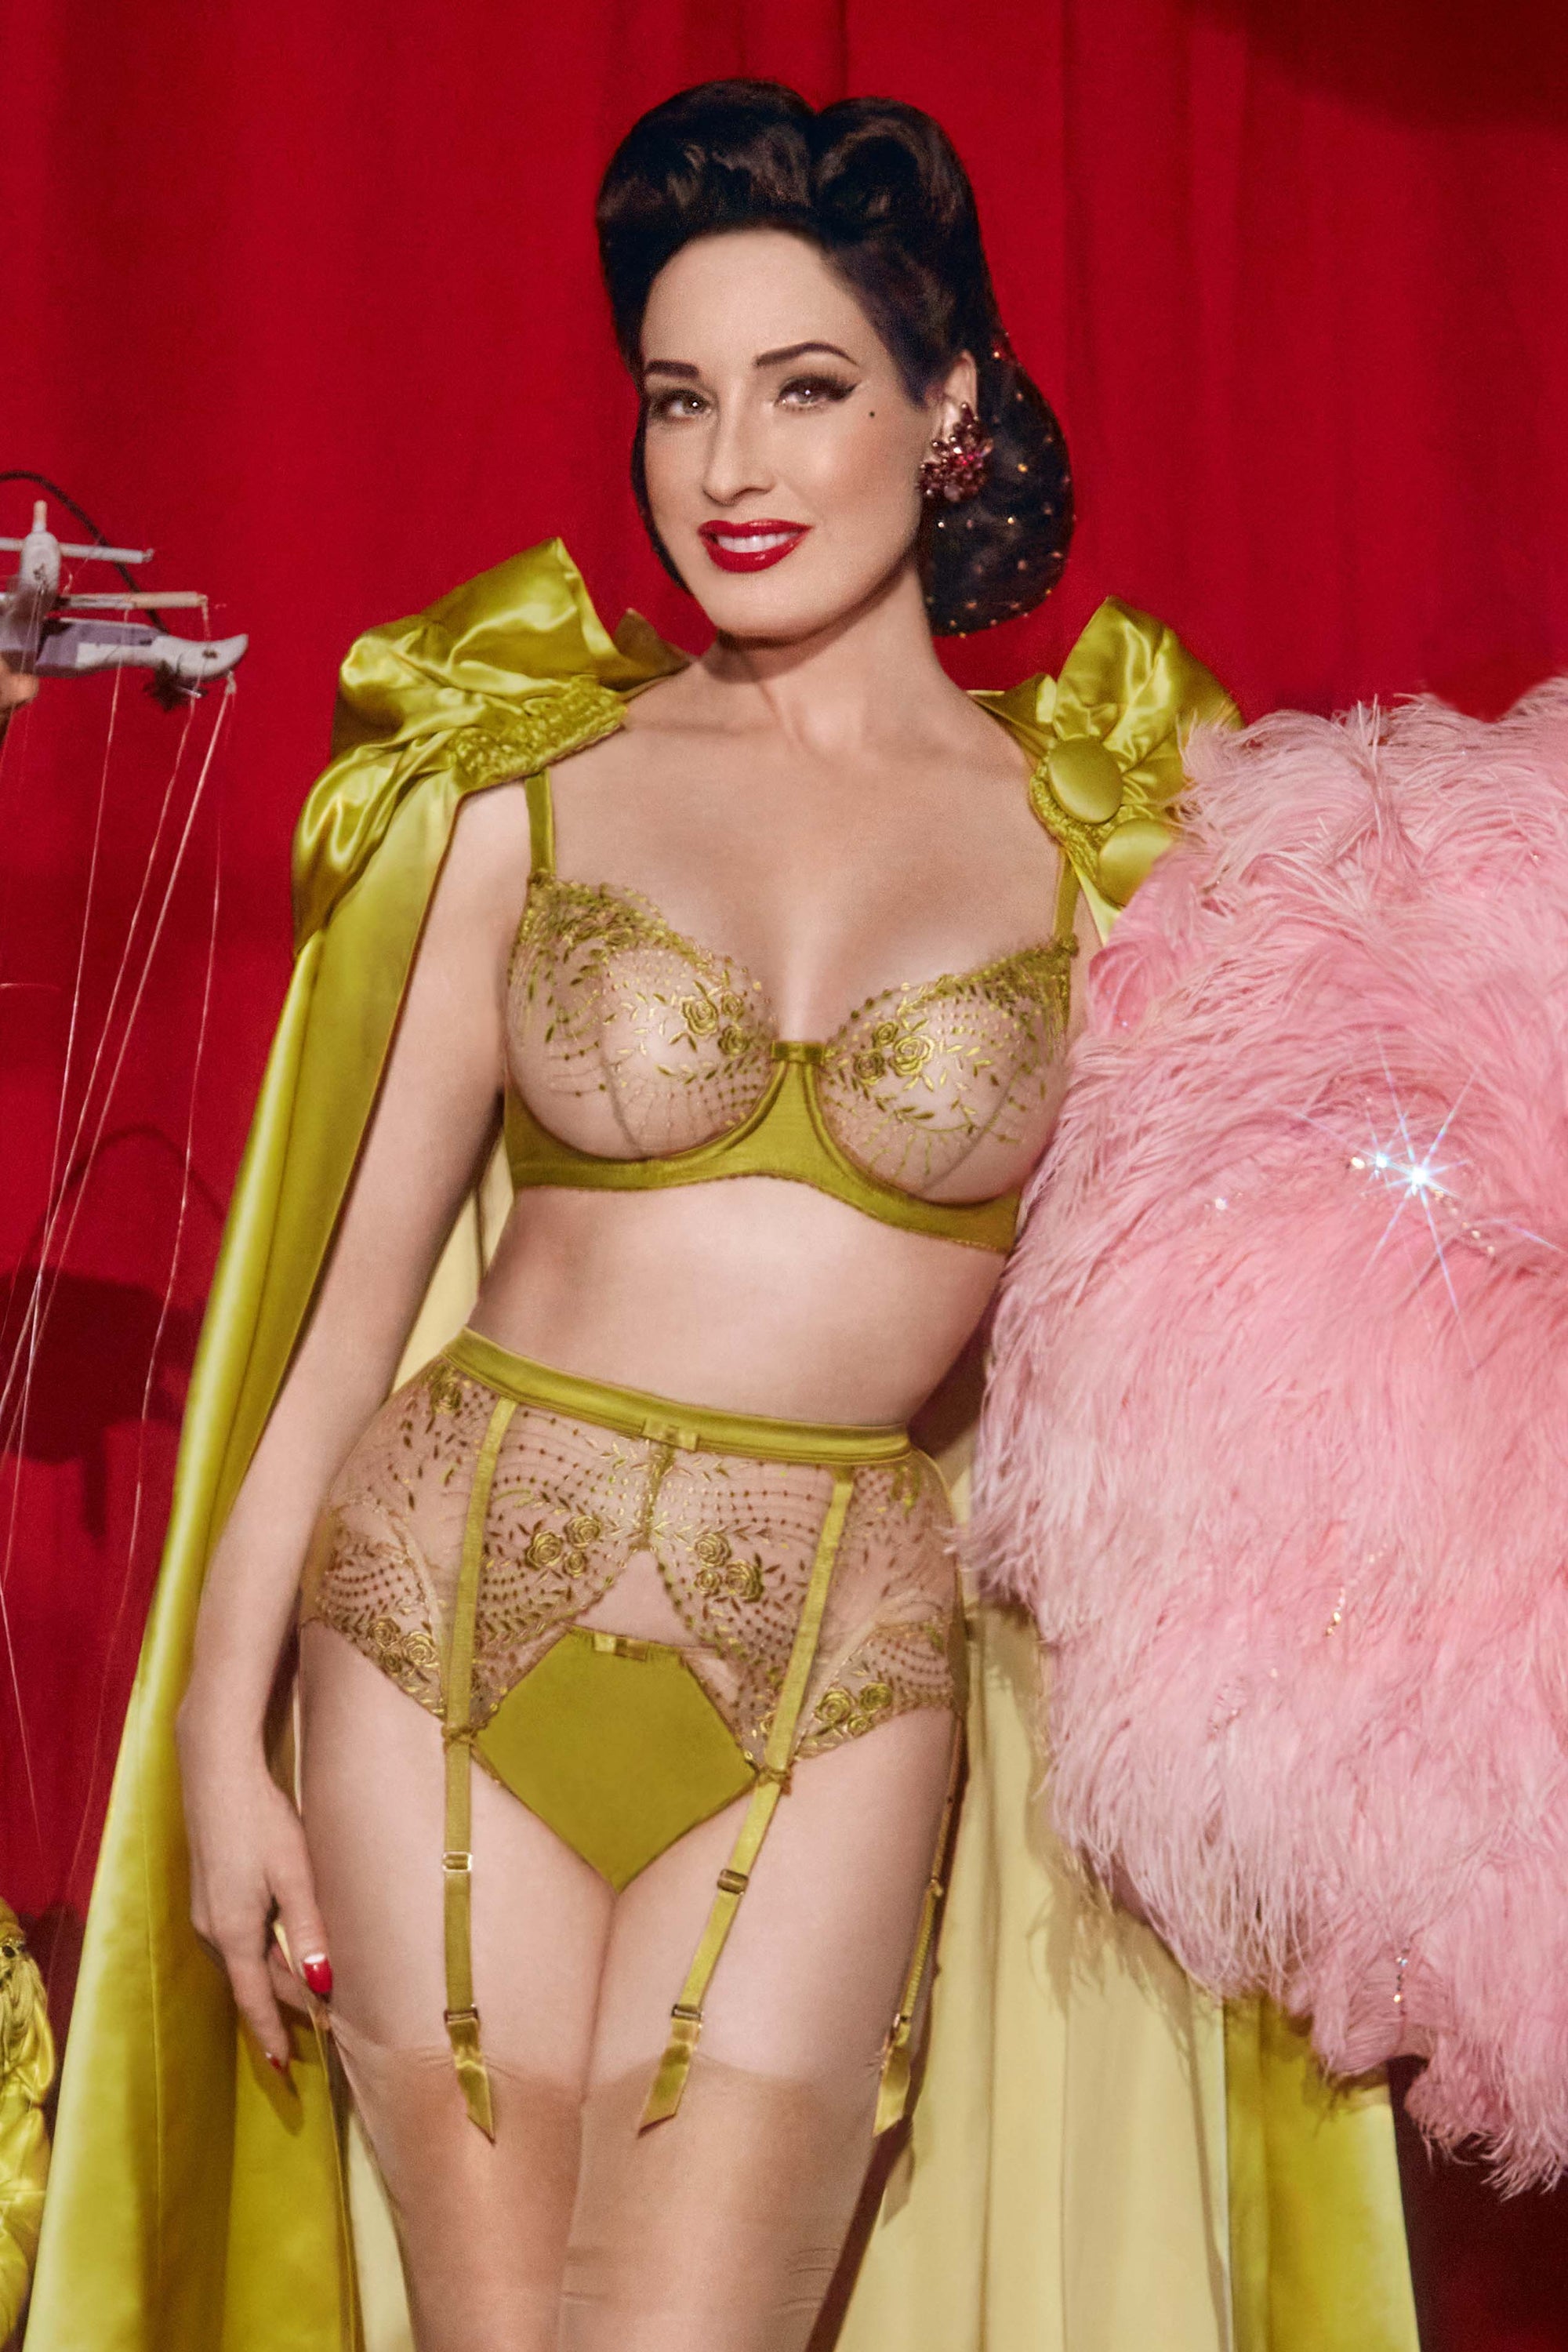 Classic and timeless vintage and retro inspired lingerie ~P&P